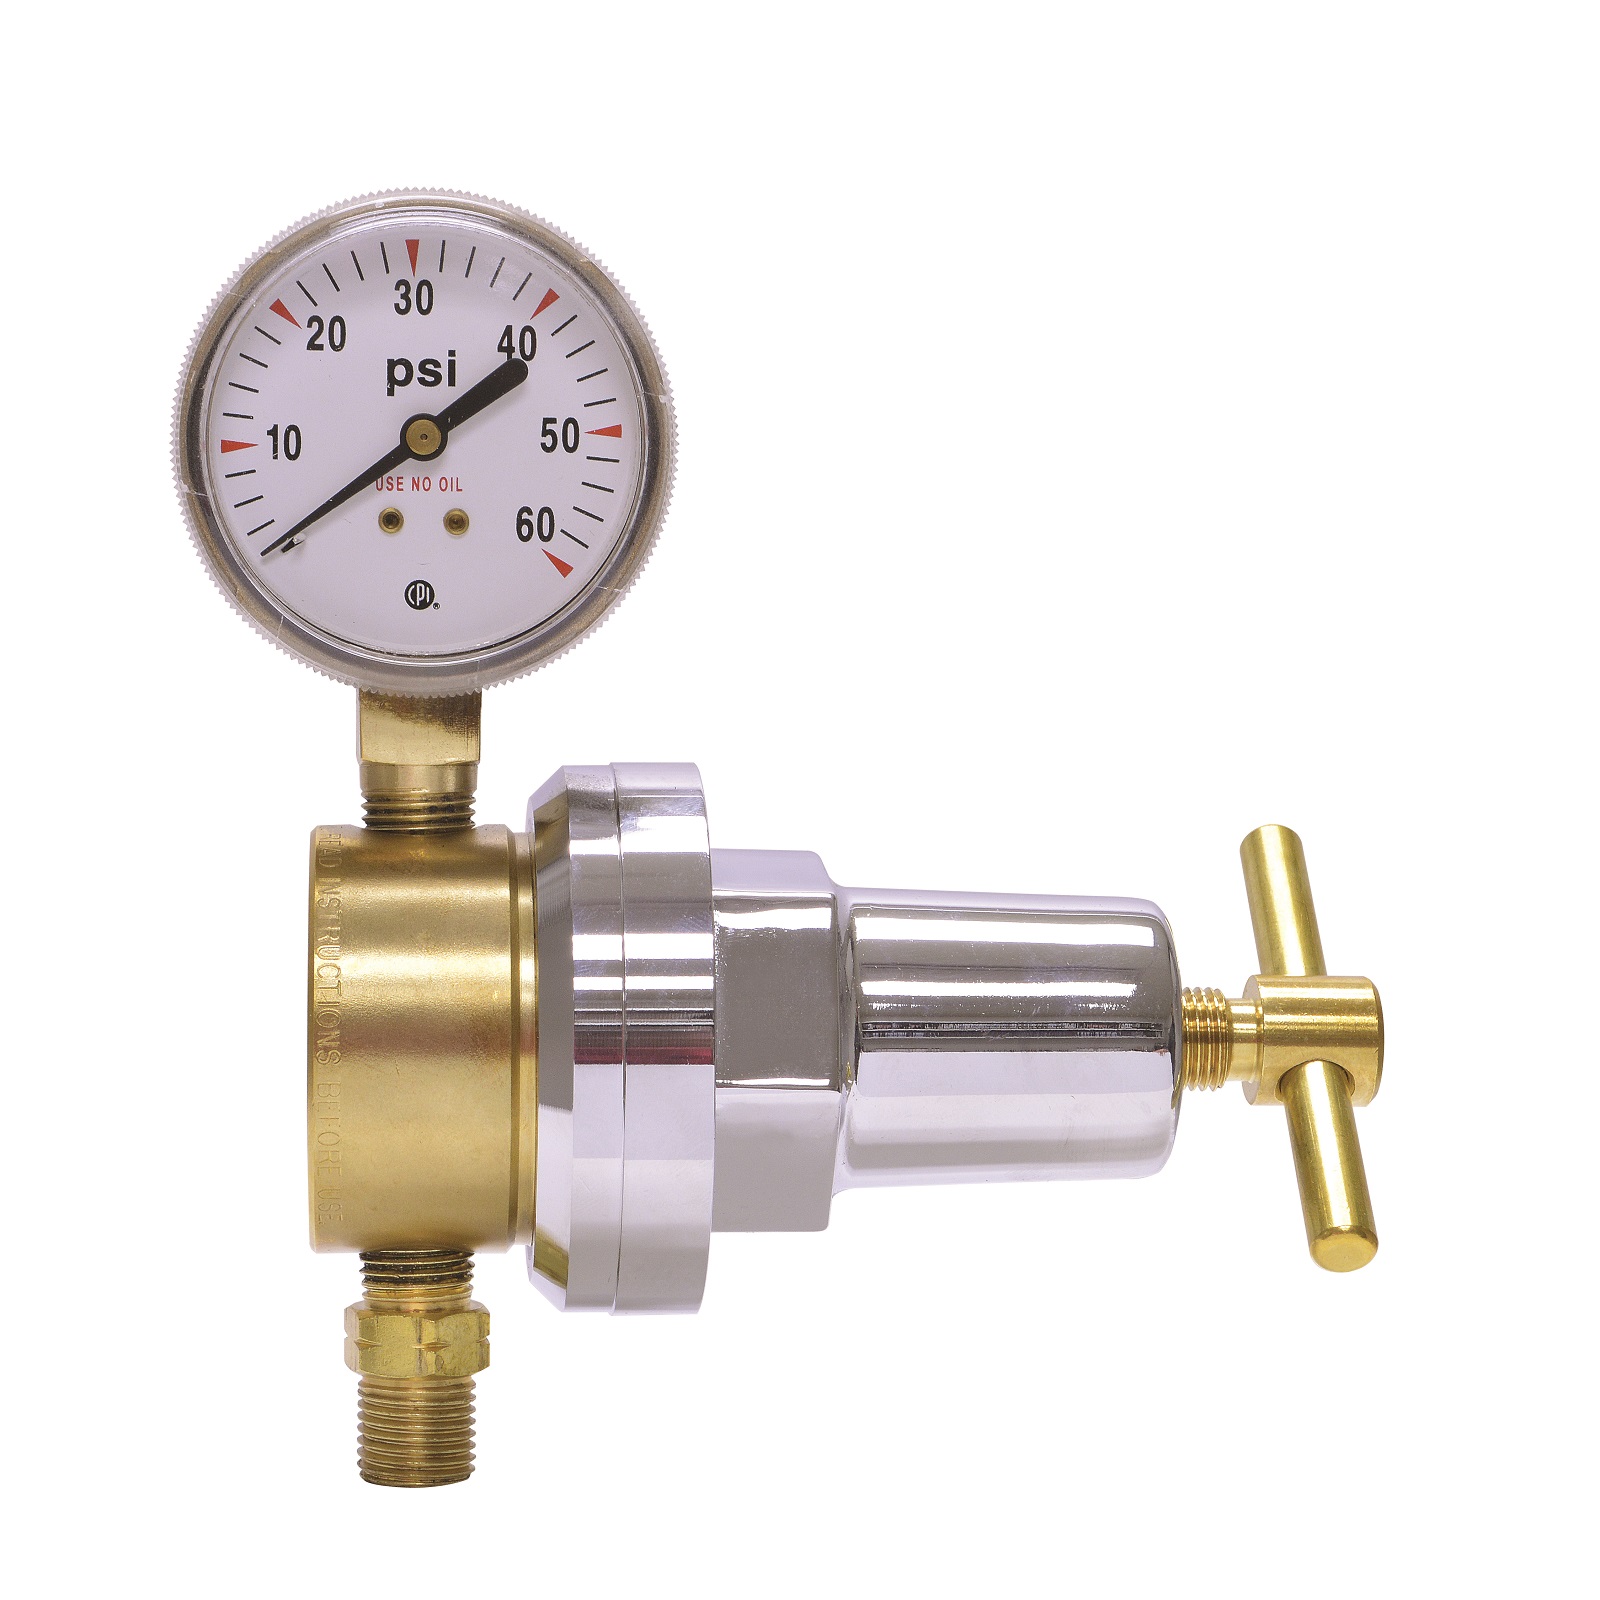 Uniweld RUH8212 Medium/Heavy Duty Single Stage LPG and All fuel gas Regulator with a CGA510 Inlet 